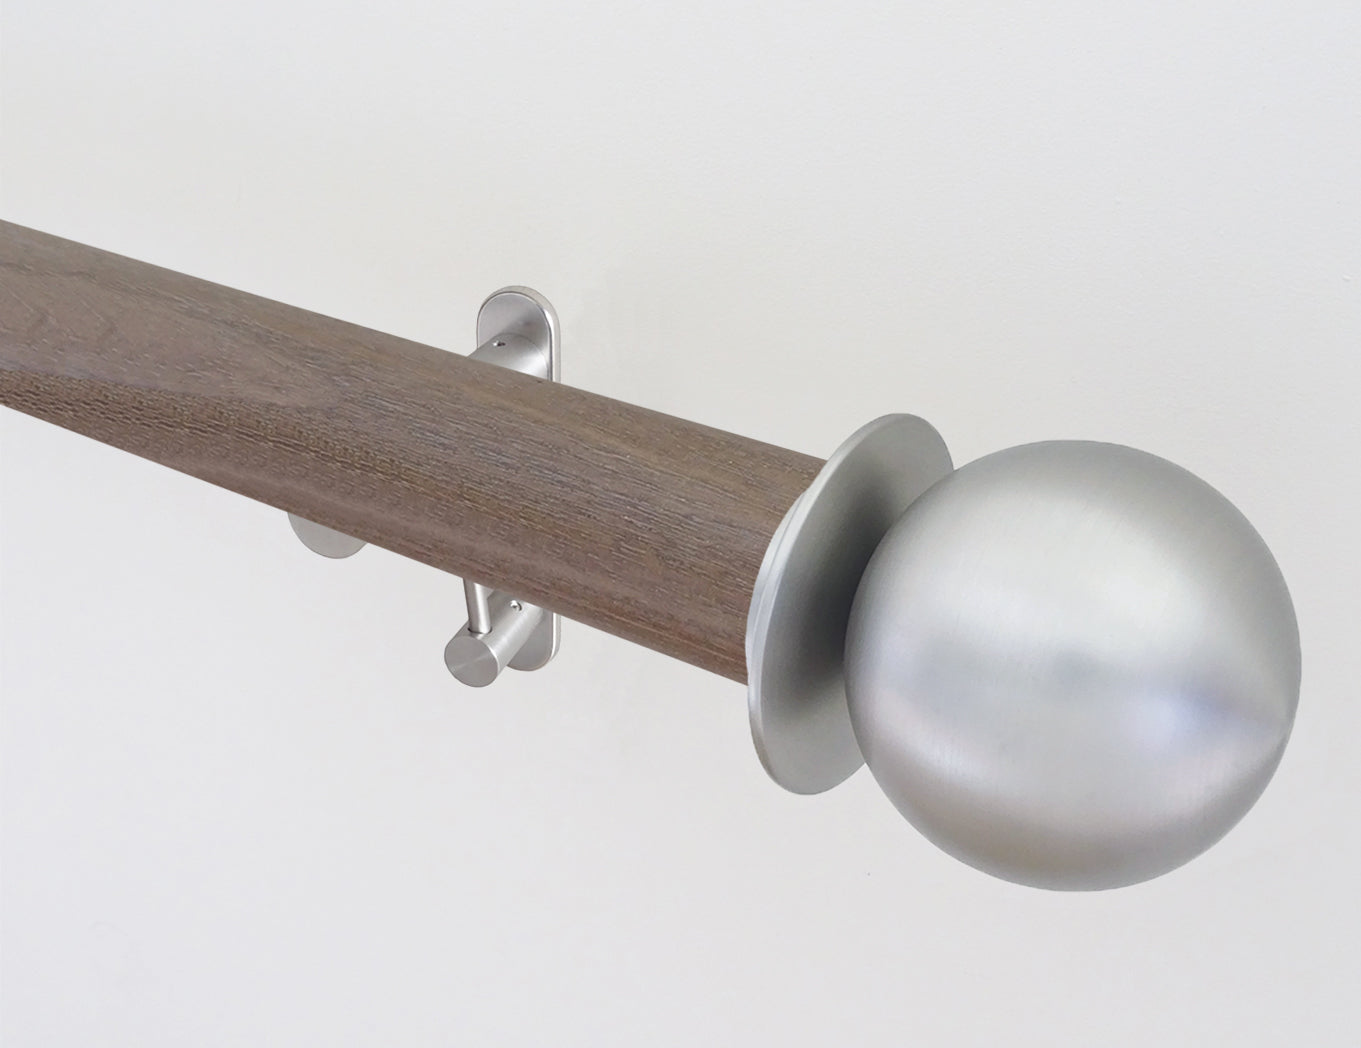 weathered oak wooden tracked pole with ball finials